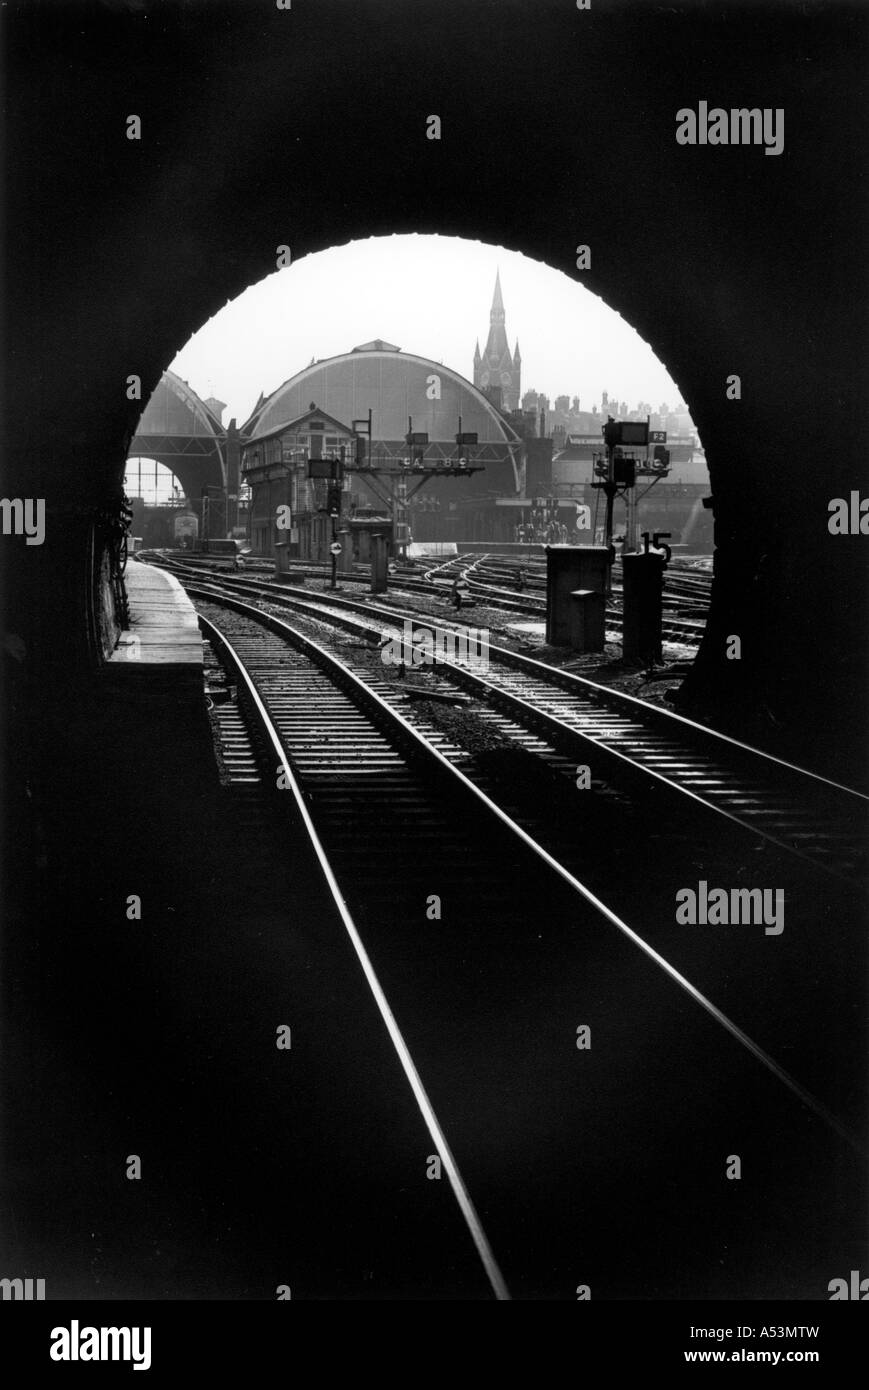 Painet ha1464 295 black and white landscape kings cross railway station london united kingdom country developing nation less Stock Photo